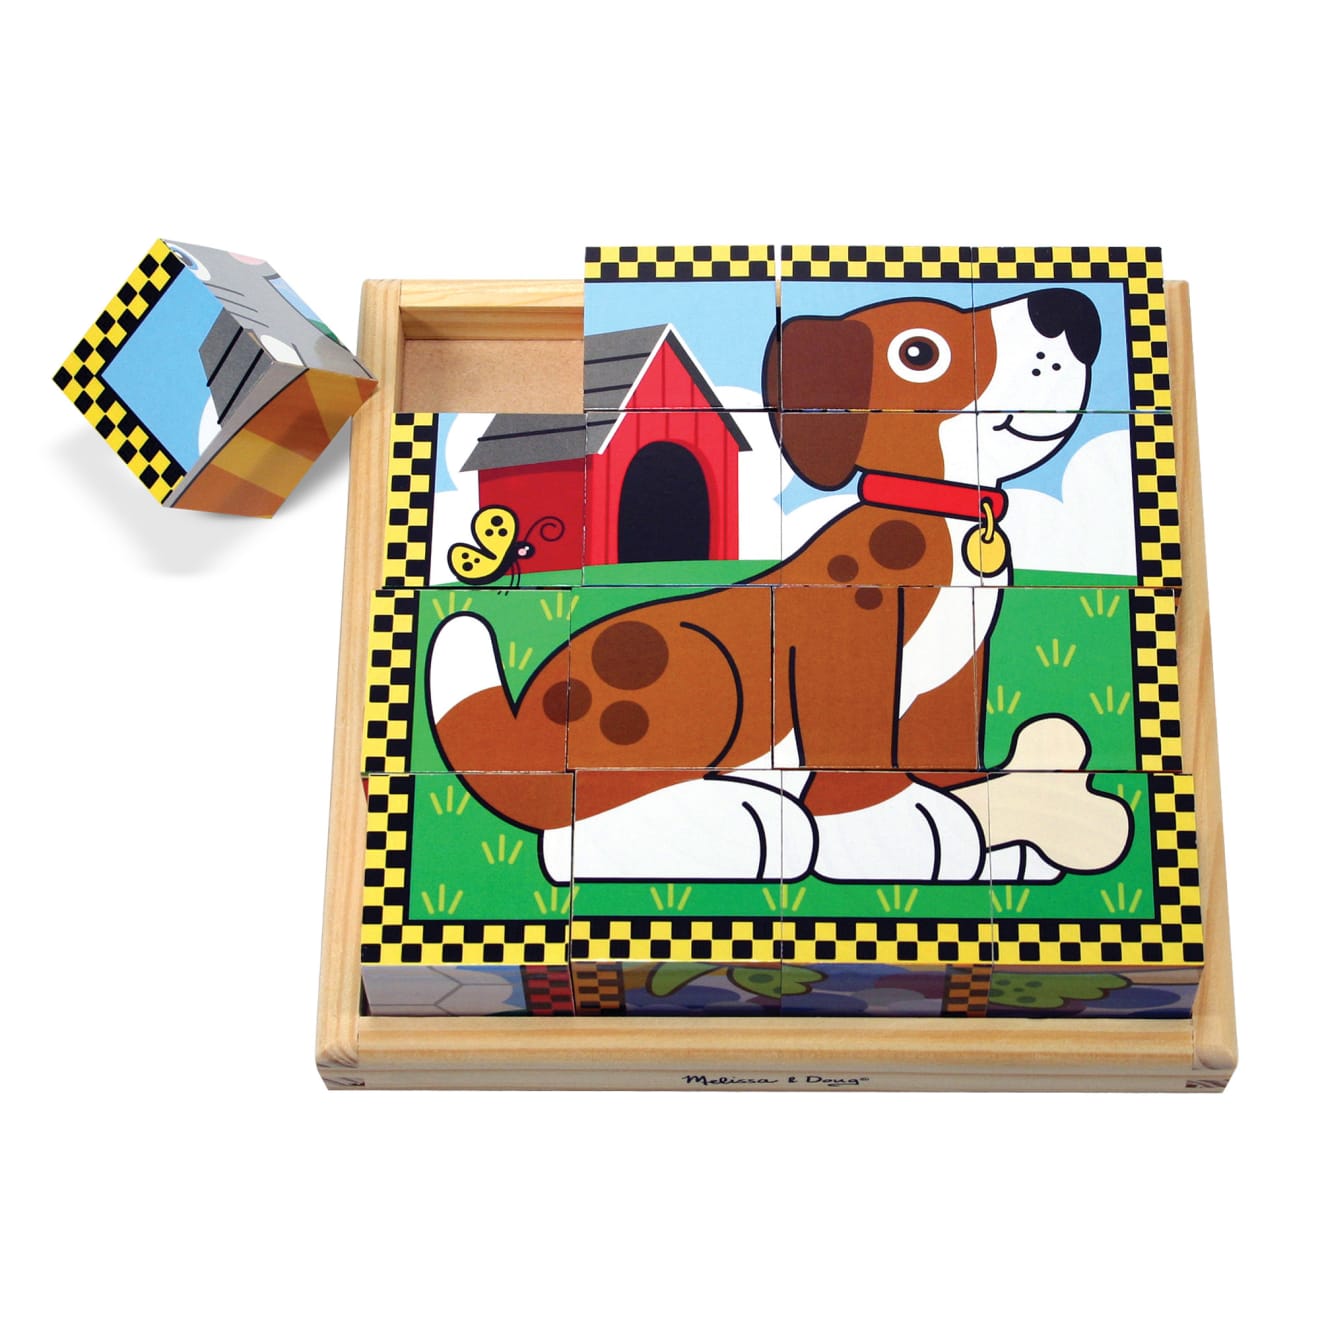 https://cdn.shopify.com/s/files/1/0550/8487/5830/products/Pets-Cube-Puzzle-16-Pieces-003771-1-Assembled-Decorated.jpg?v=1670013065